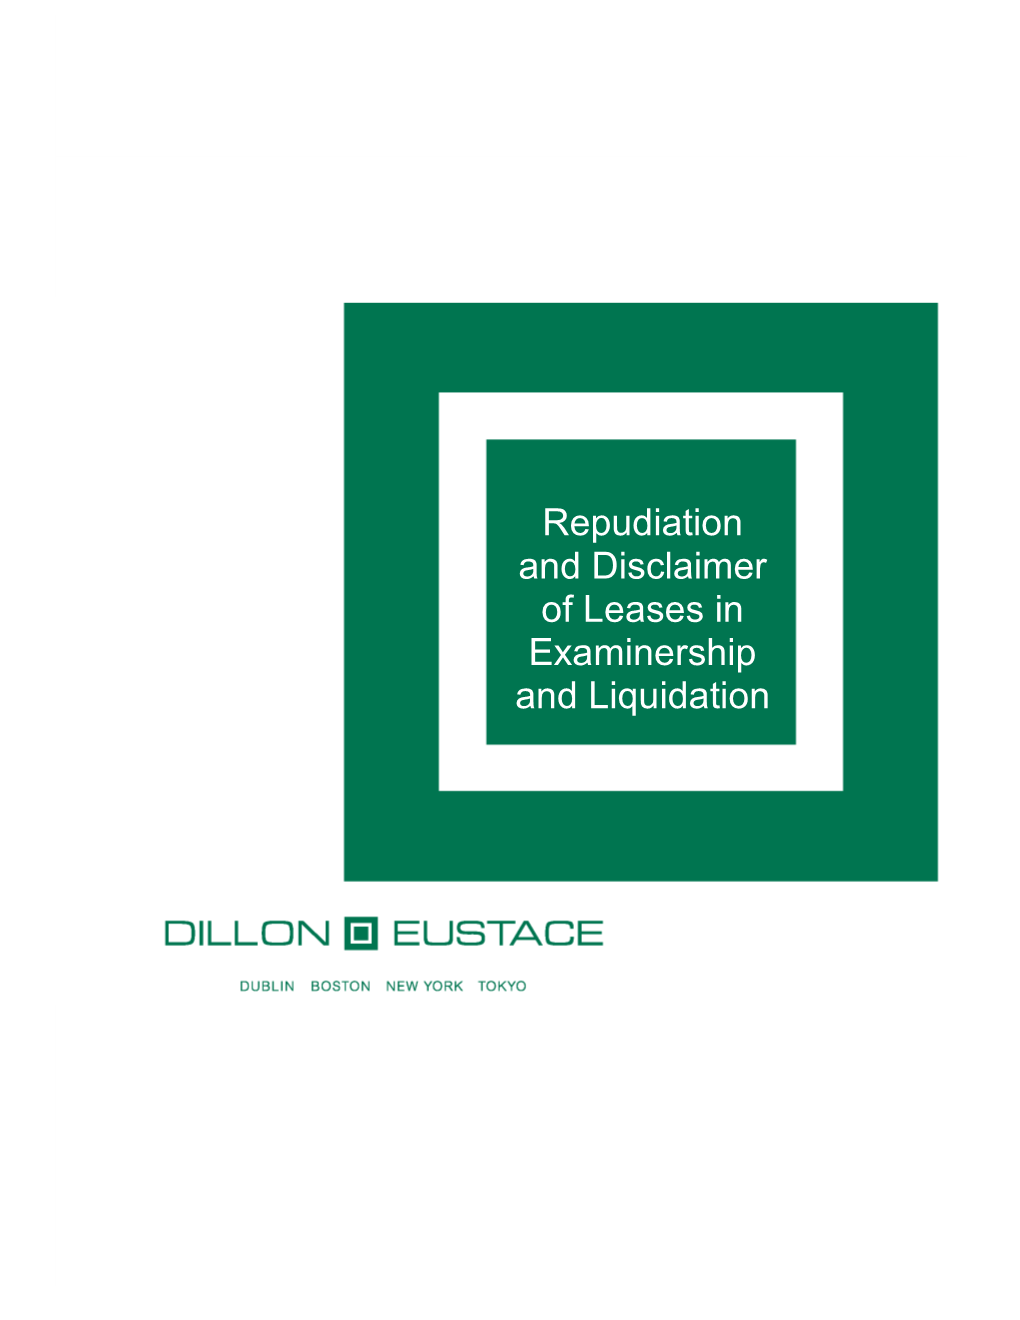 Repudiation and Disclaimer of Leases in Examinership and Liquidation